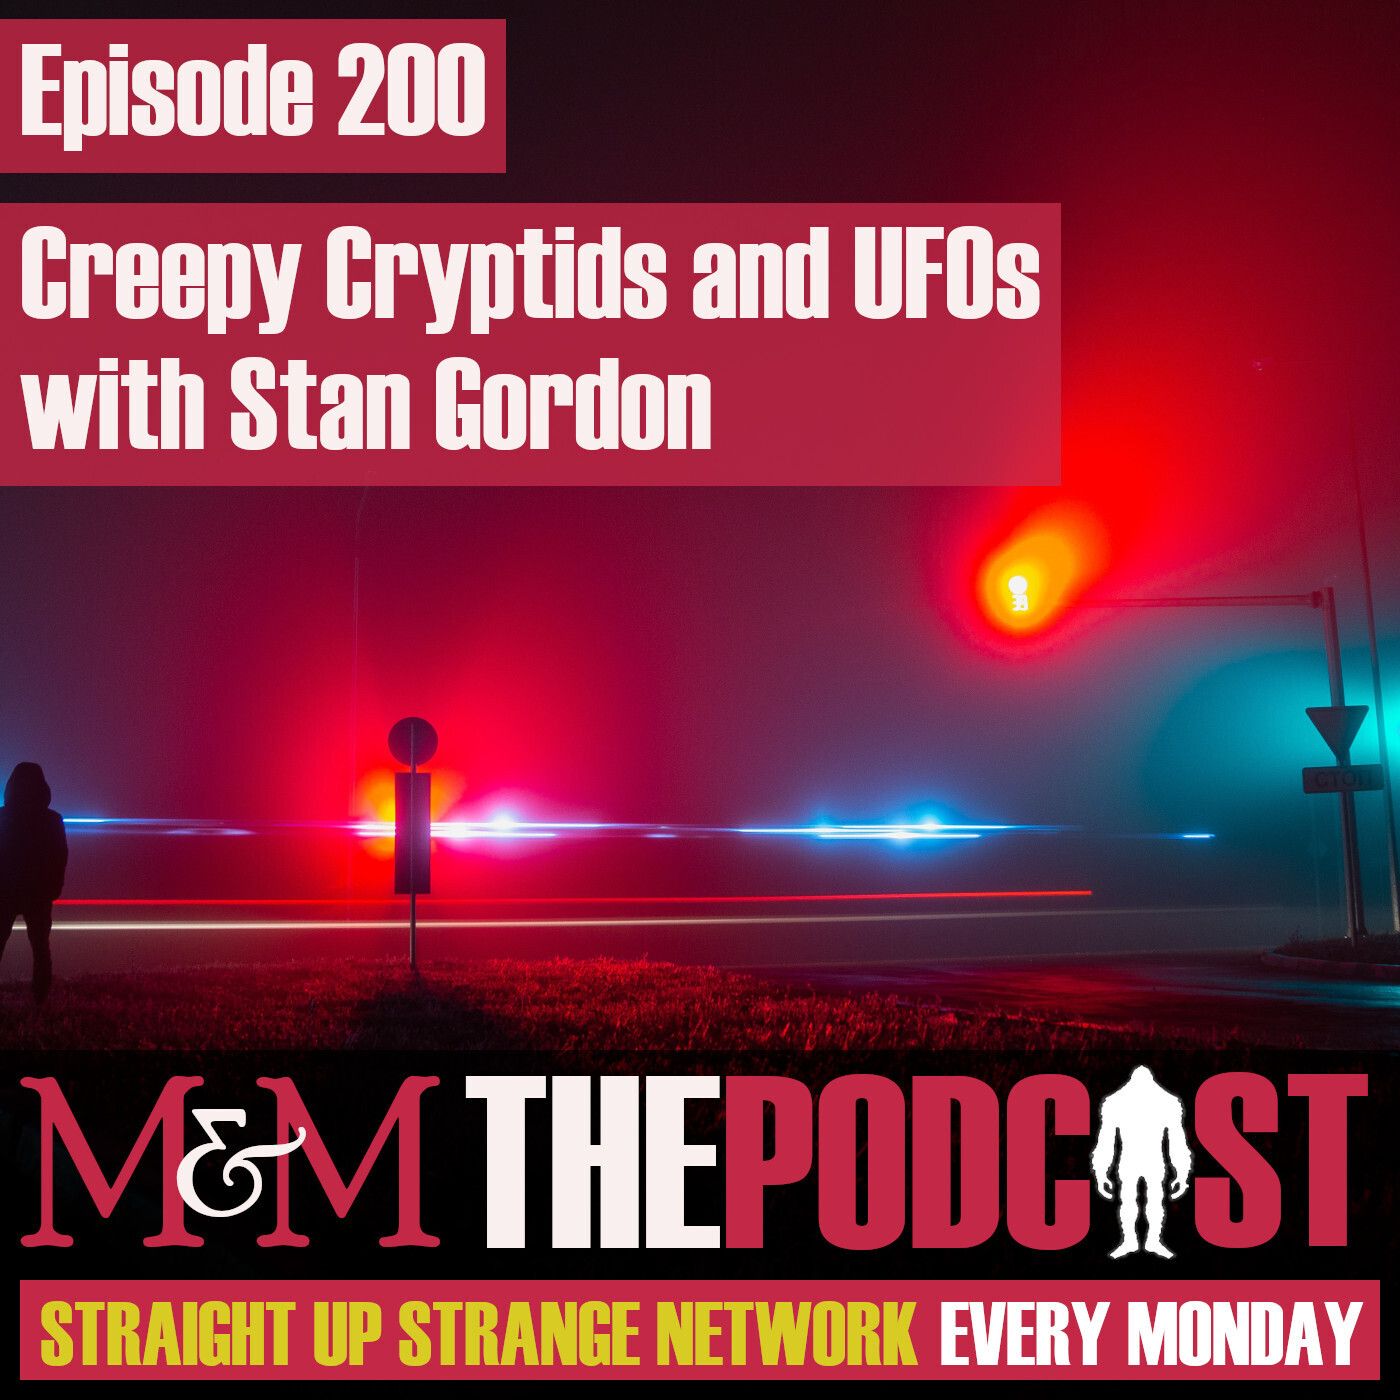 Mysteries and Monsters: Episode 200 Creepy Cryptids and UFOs with Stan Gordon